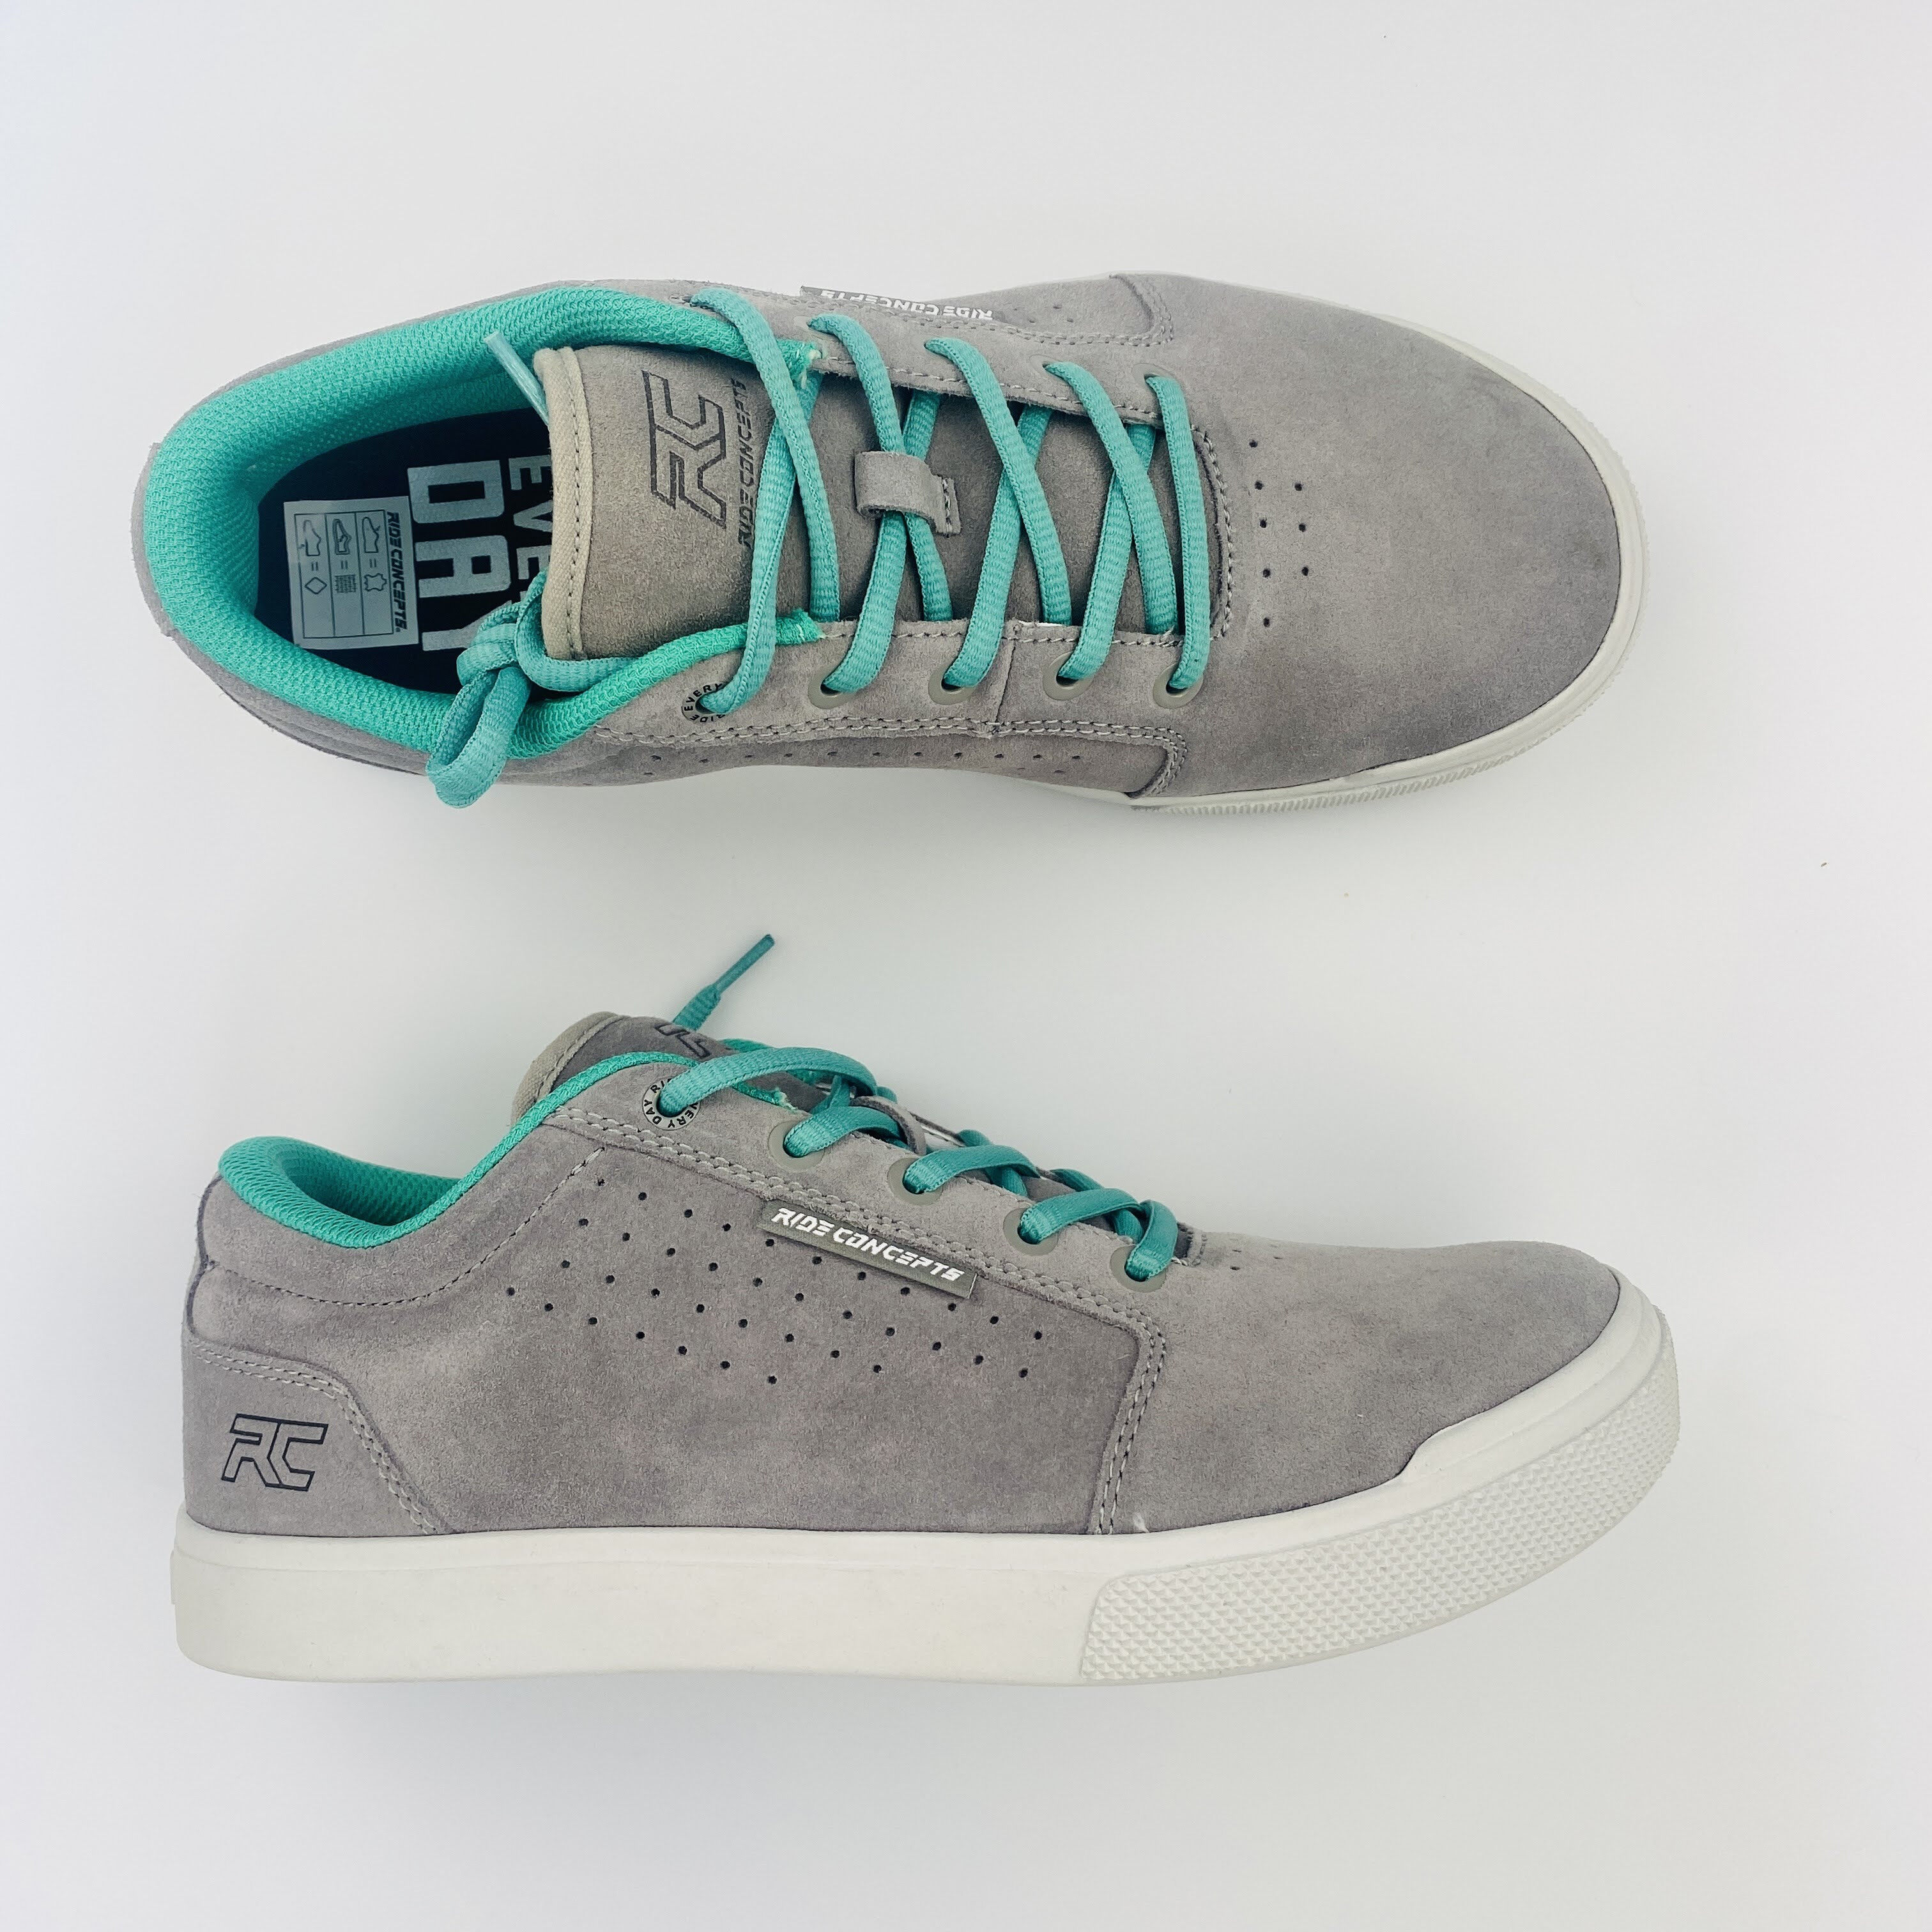 Ride Concepts Vice - Seconde main Chaussures vélo femme - Gris - 40 | Hardloop